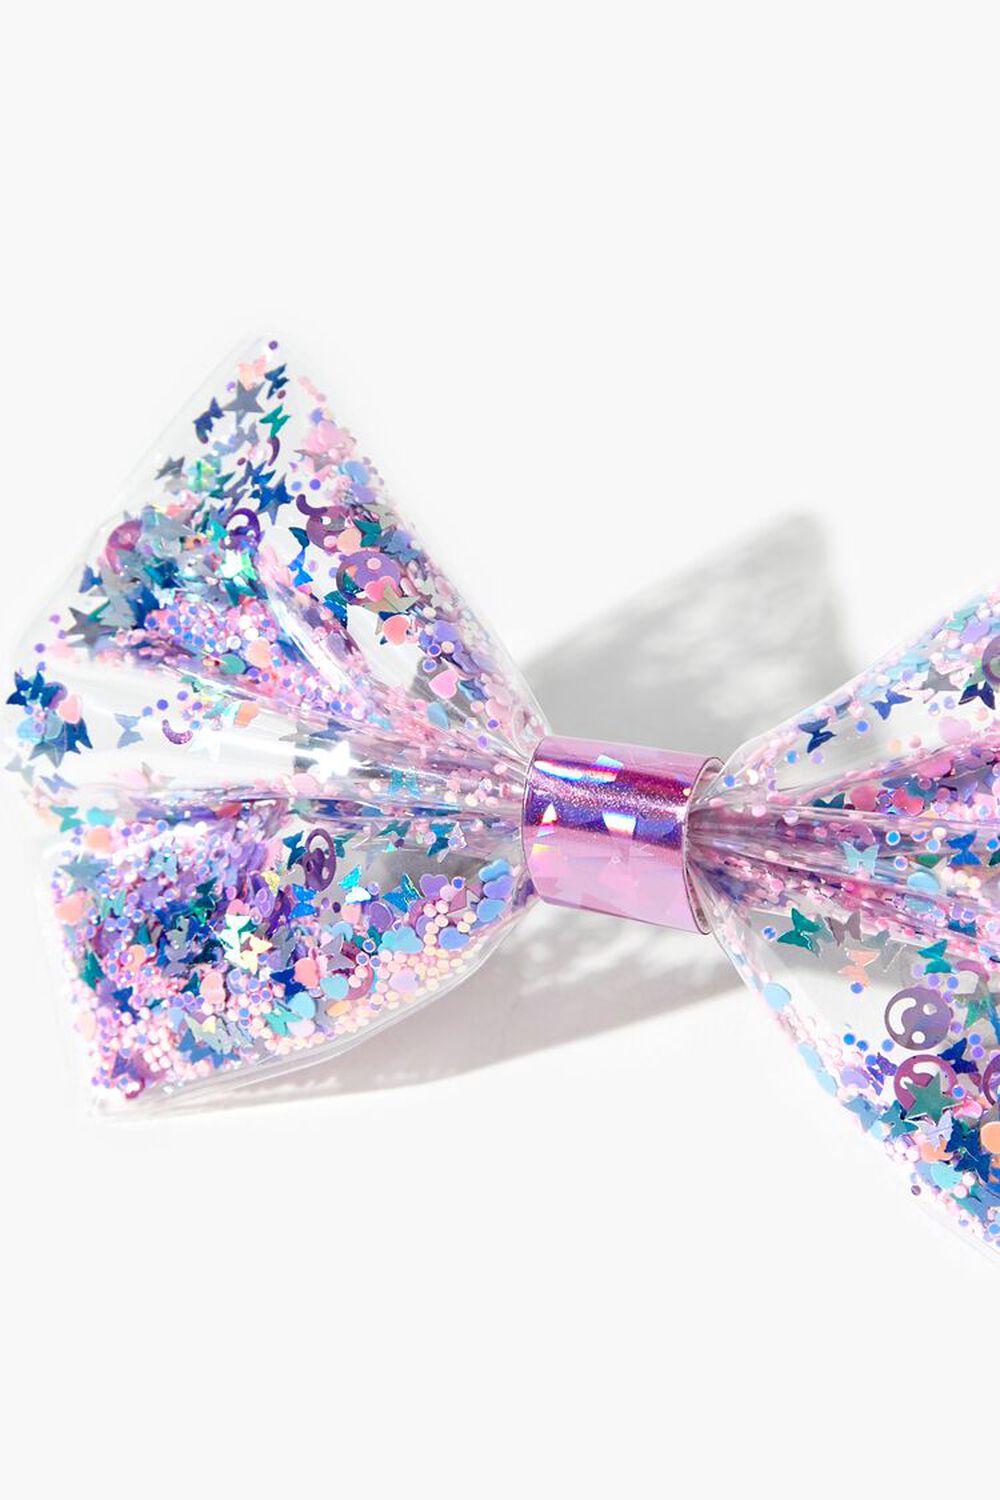 BLUE/PINK Girls Glittered Confetti Bow Hair Clip (Kids), image 3